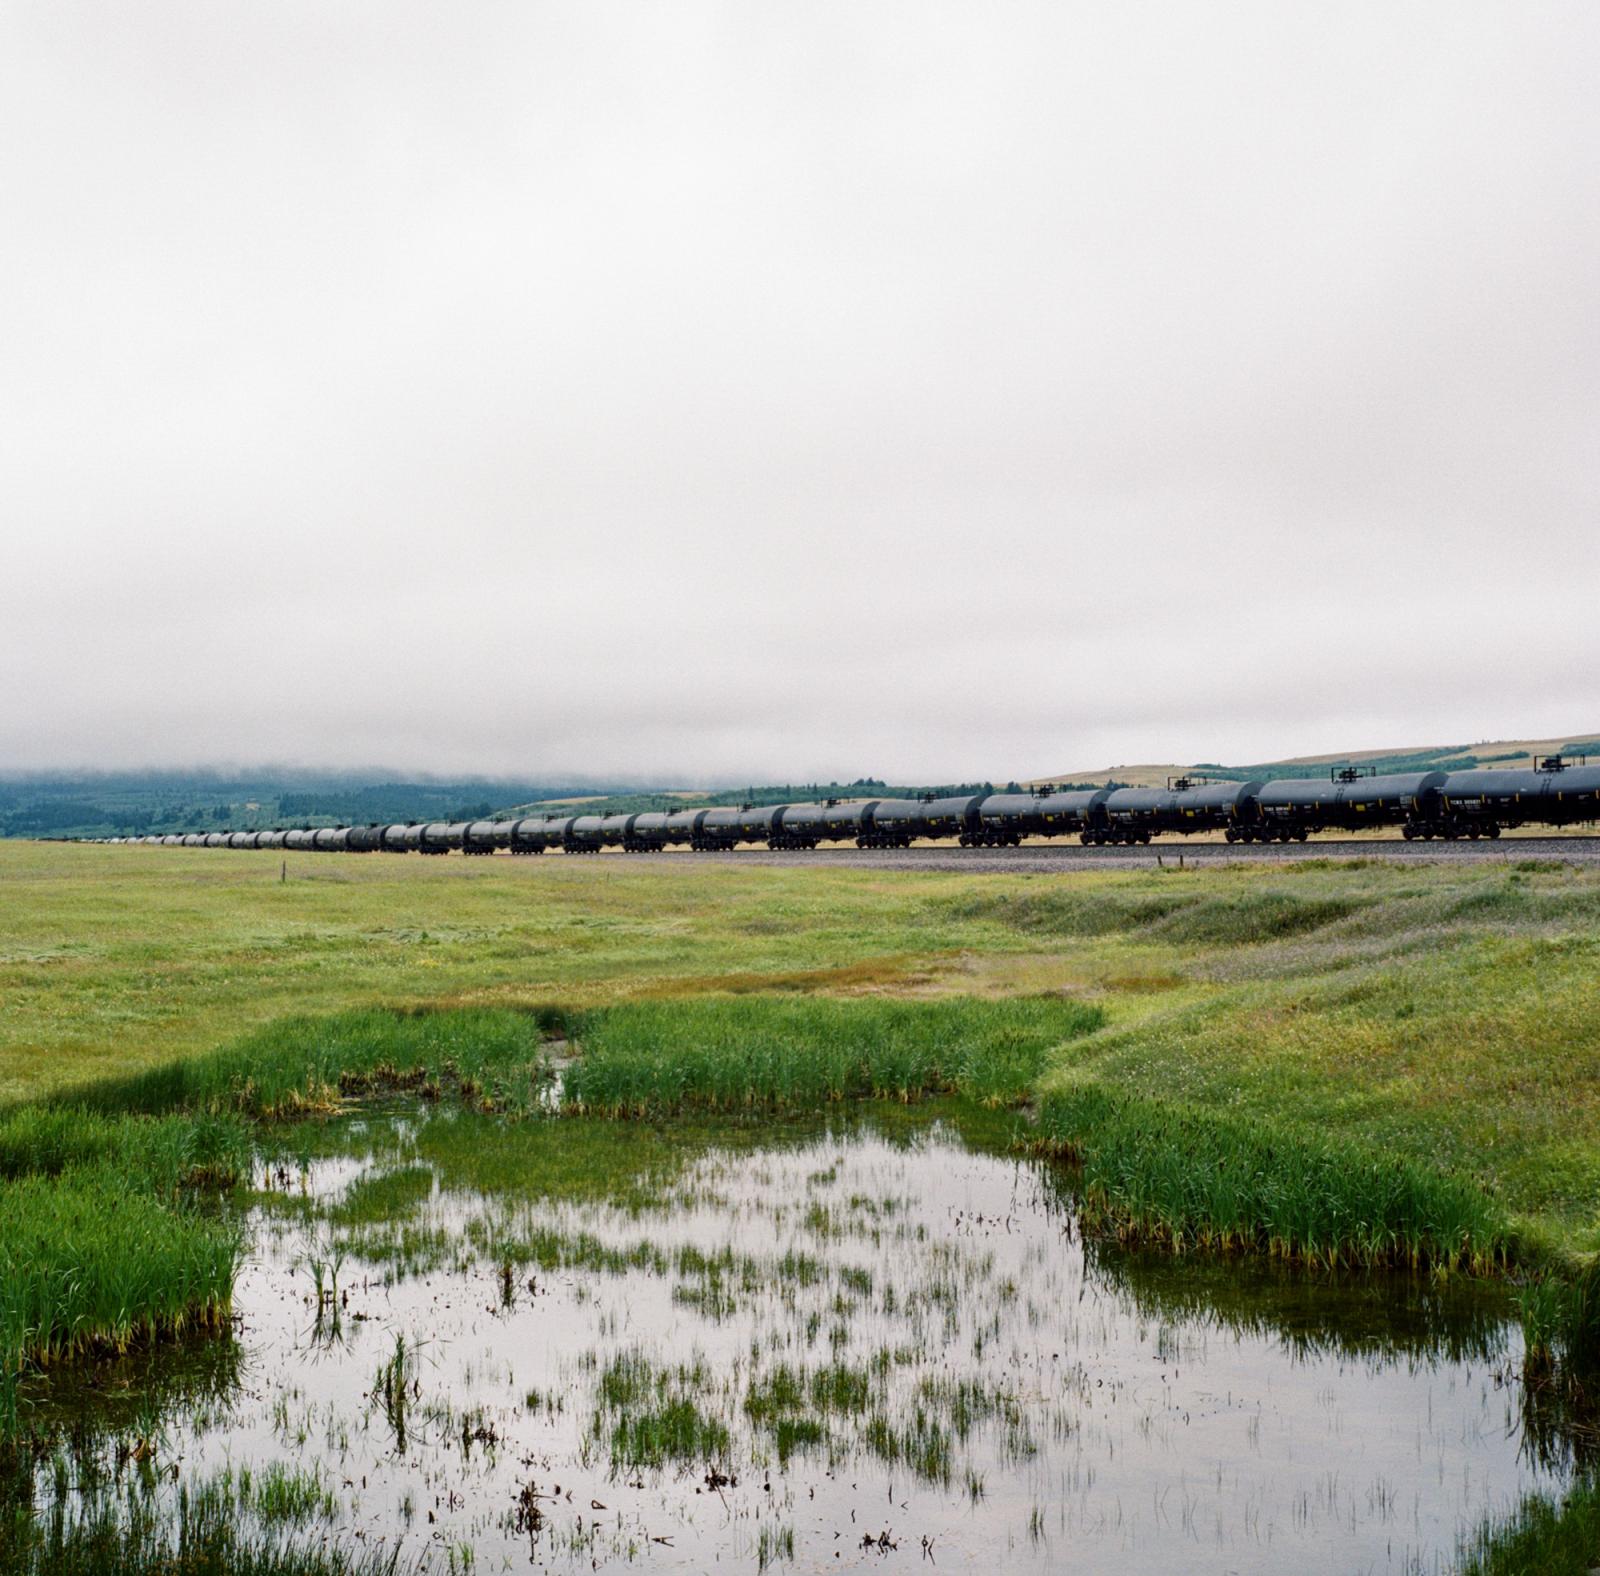 The Bakken oil shale's impact on Native American women - A freight train carrying crude oil travels through...